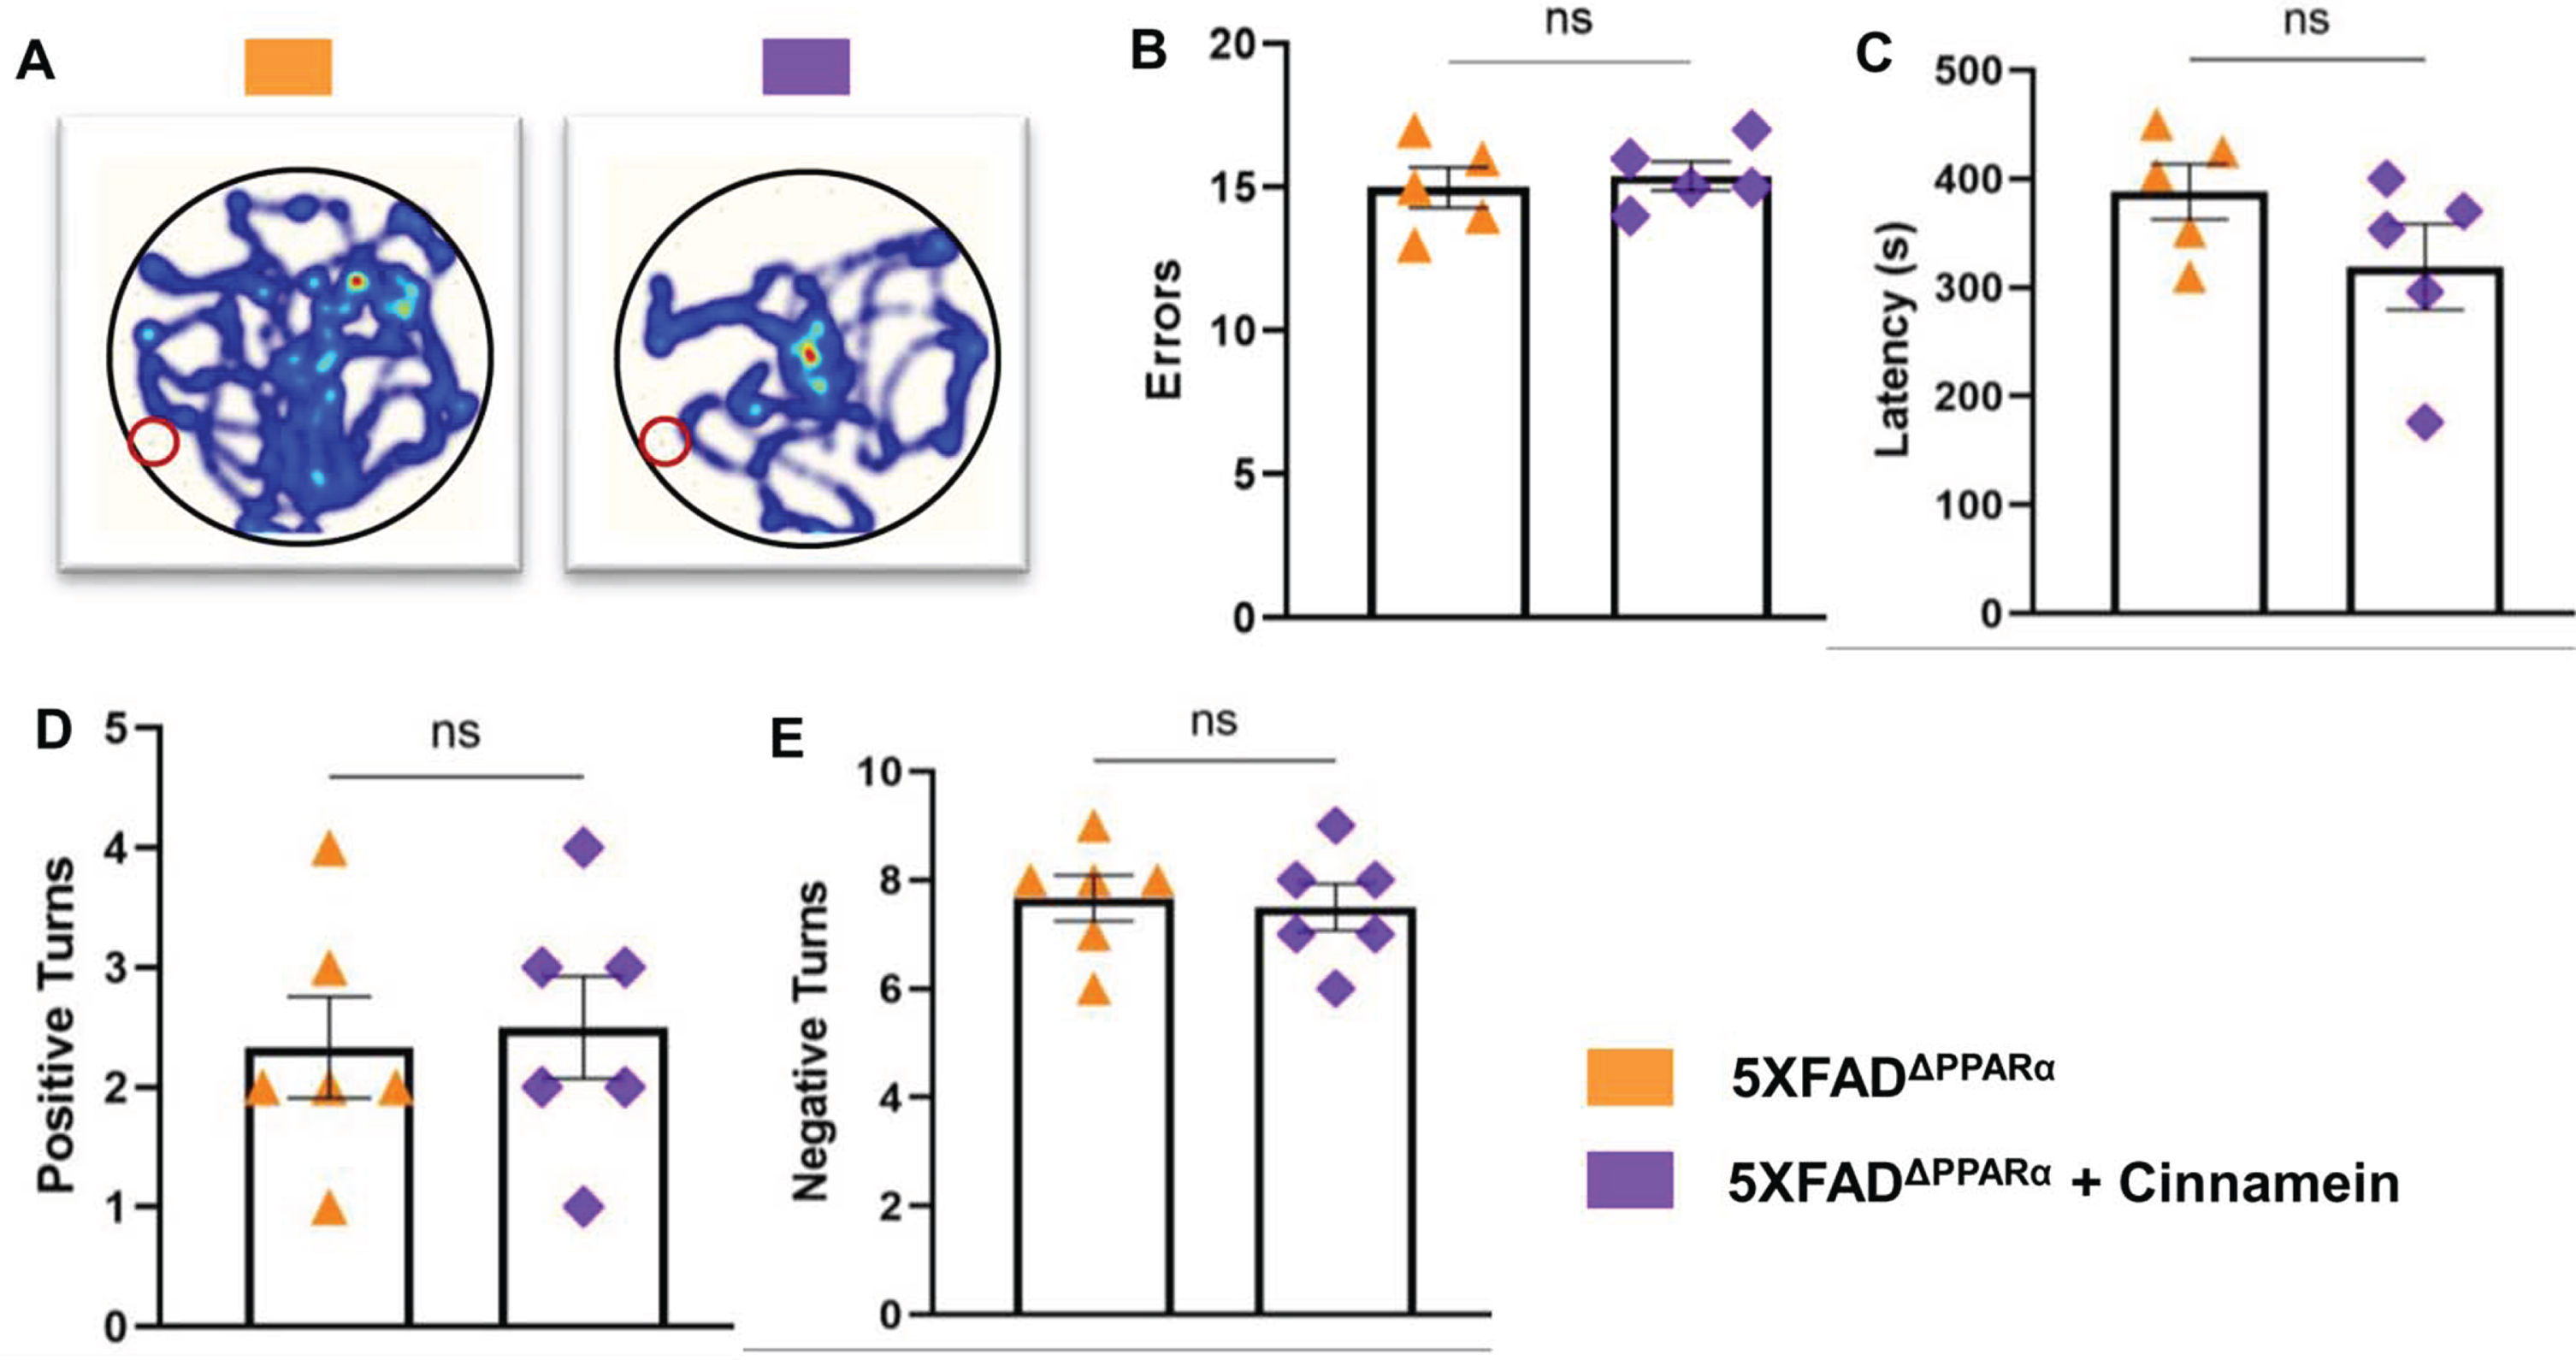 Cinnamein improves memory and learning via PPARα. Six-month-old 5XFAD and 5X FADΔPPARα mice (n = 5 per group) were administered cinnamein orally (50 mg/kg/day) for one month followed by monitoring spatial learning and memory by Barnes maze (A, heatmap; B, error; C, latency) and T maze (D, positive turns; E, negative turns). All data, analyzed with Prism, represent the mean±SEM. One-way ANOVA followed by Šìdák’s multiple comparisons test was used for statistical analysis. *p < 0.05; ***p < 0.001; ****p < 0.0001; ns, not significant.